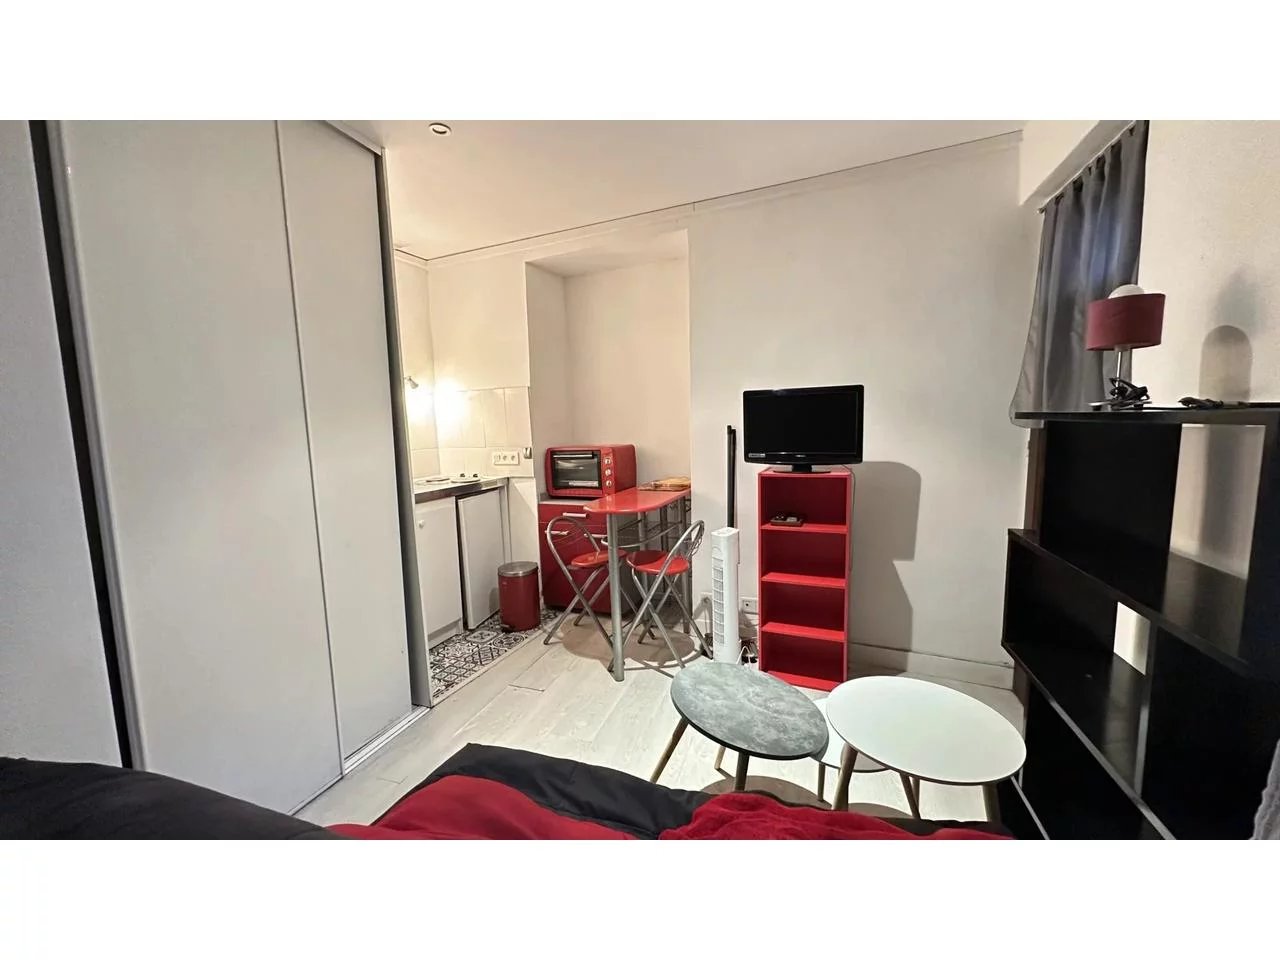 Appartement  1 Rooms 17.52m2  for sale    86 000 €